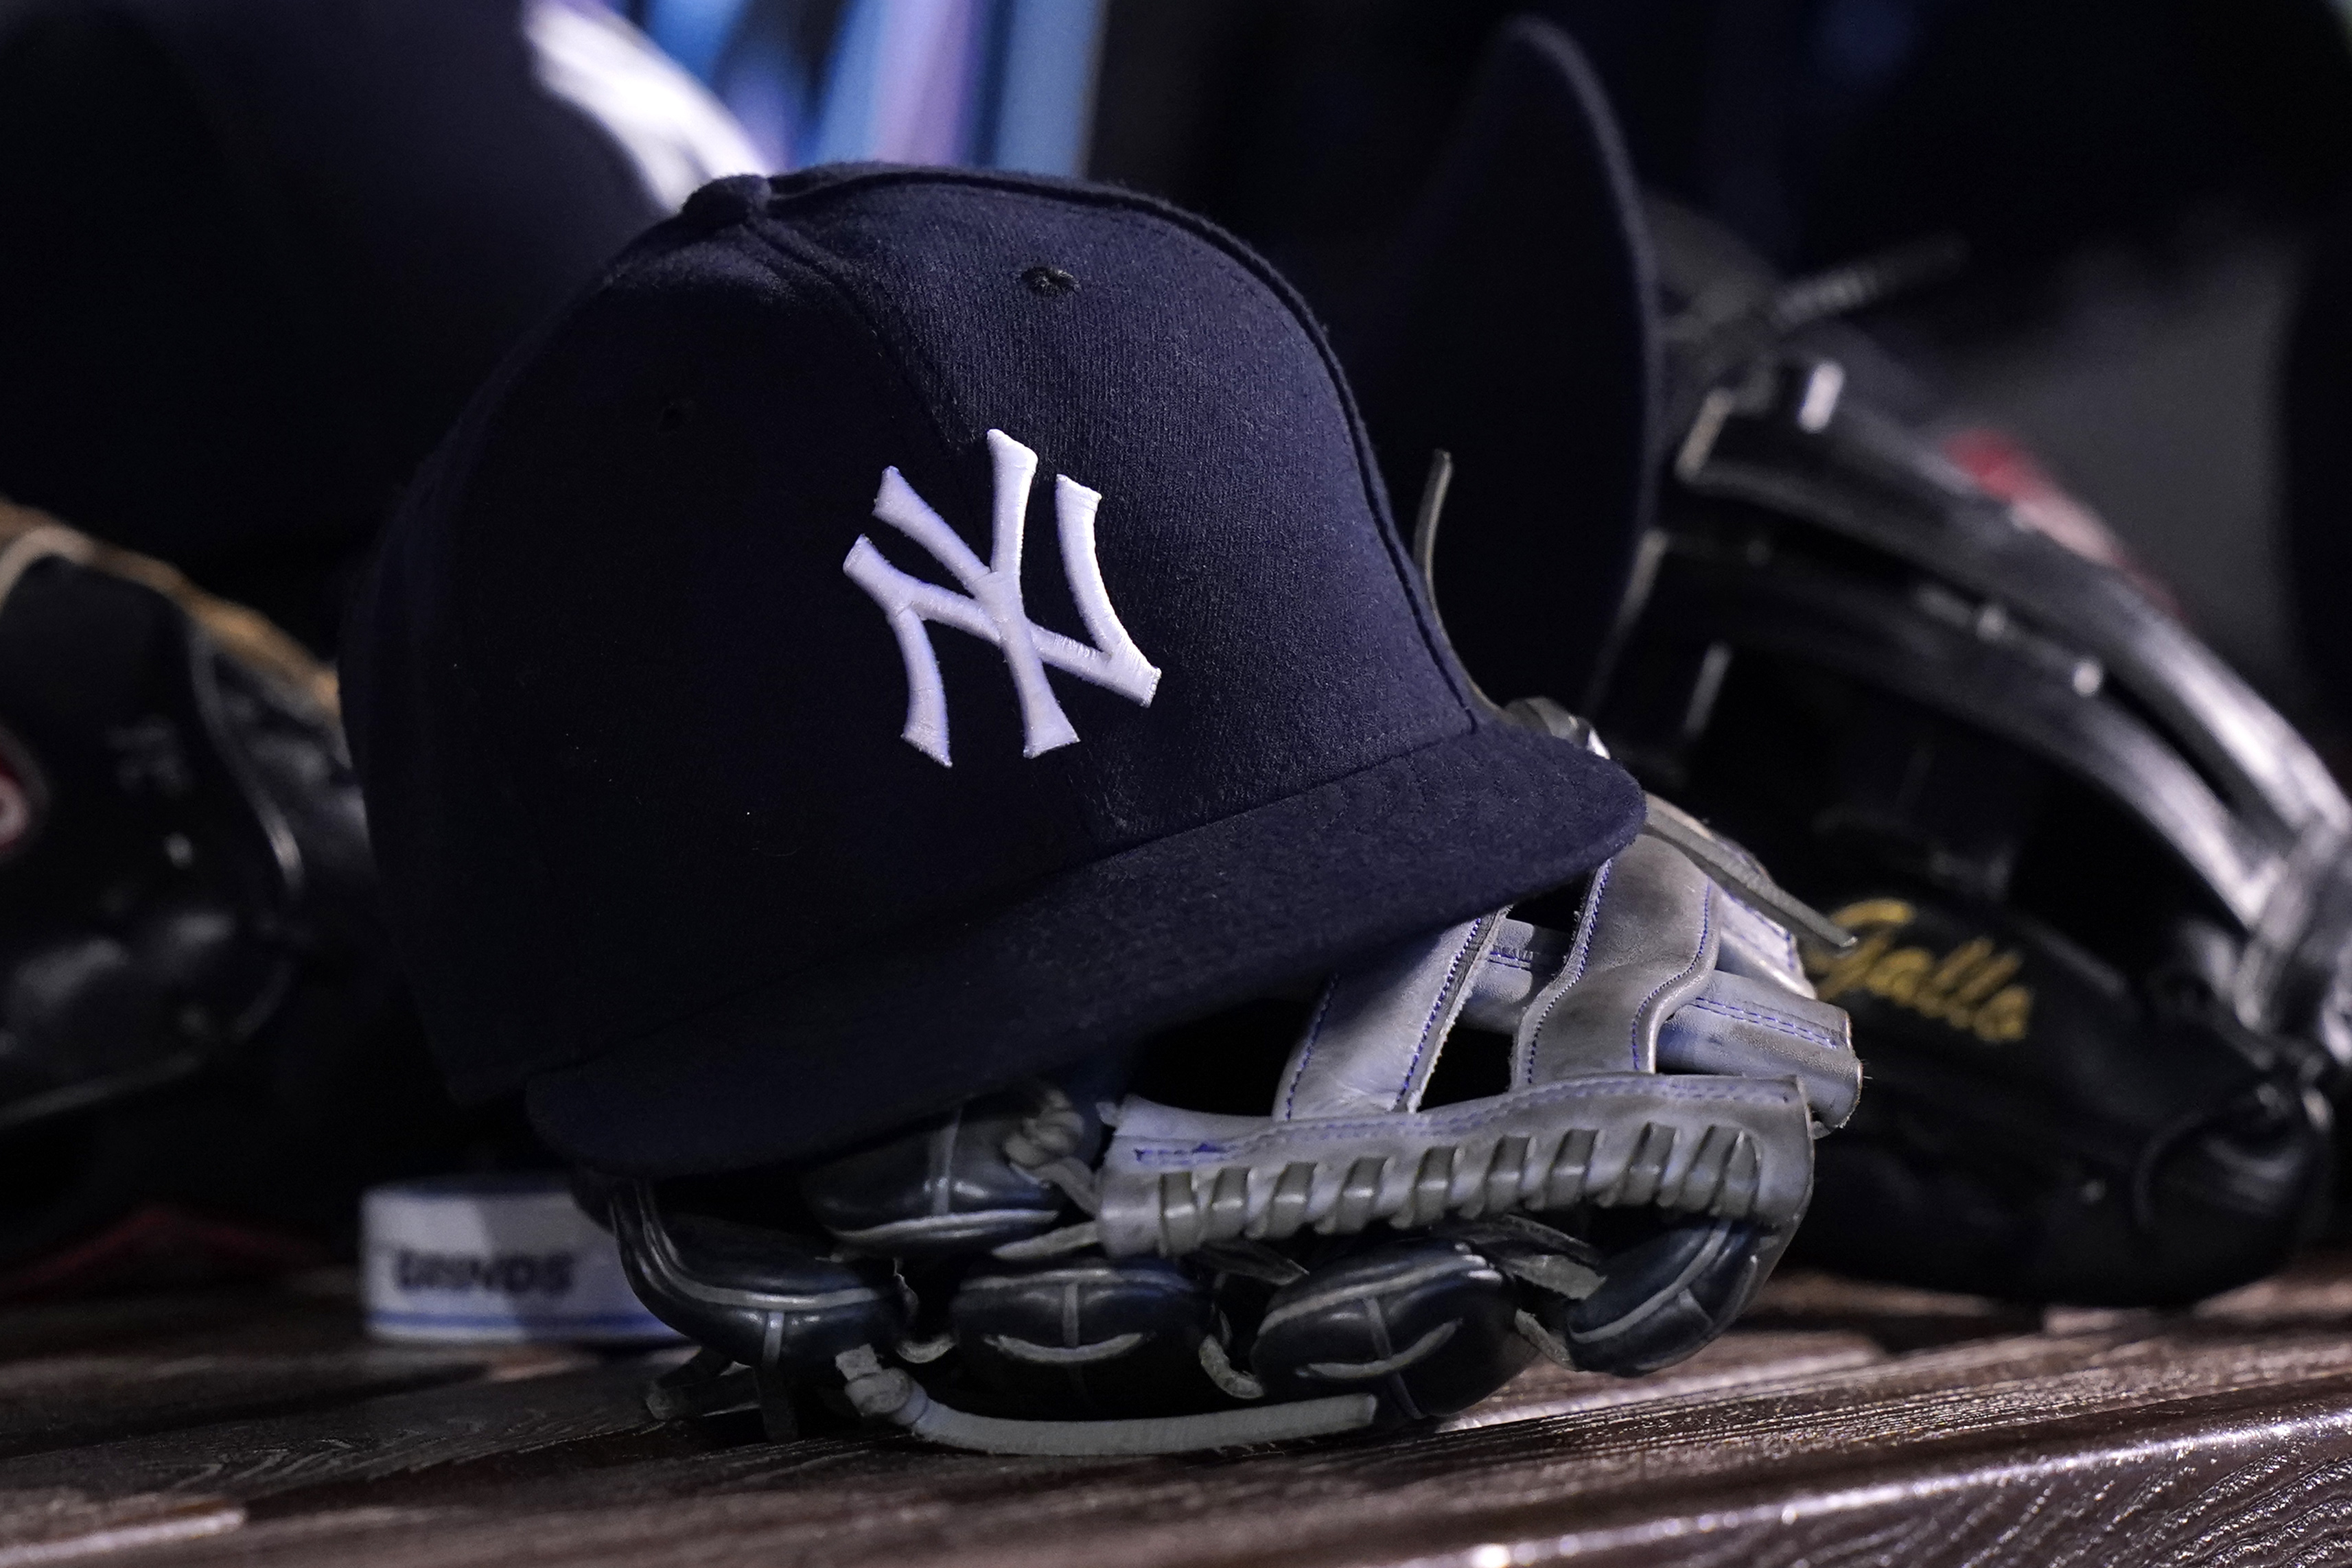 Yankees recall their first days in iconic pinstripes: 'Welcome to